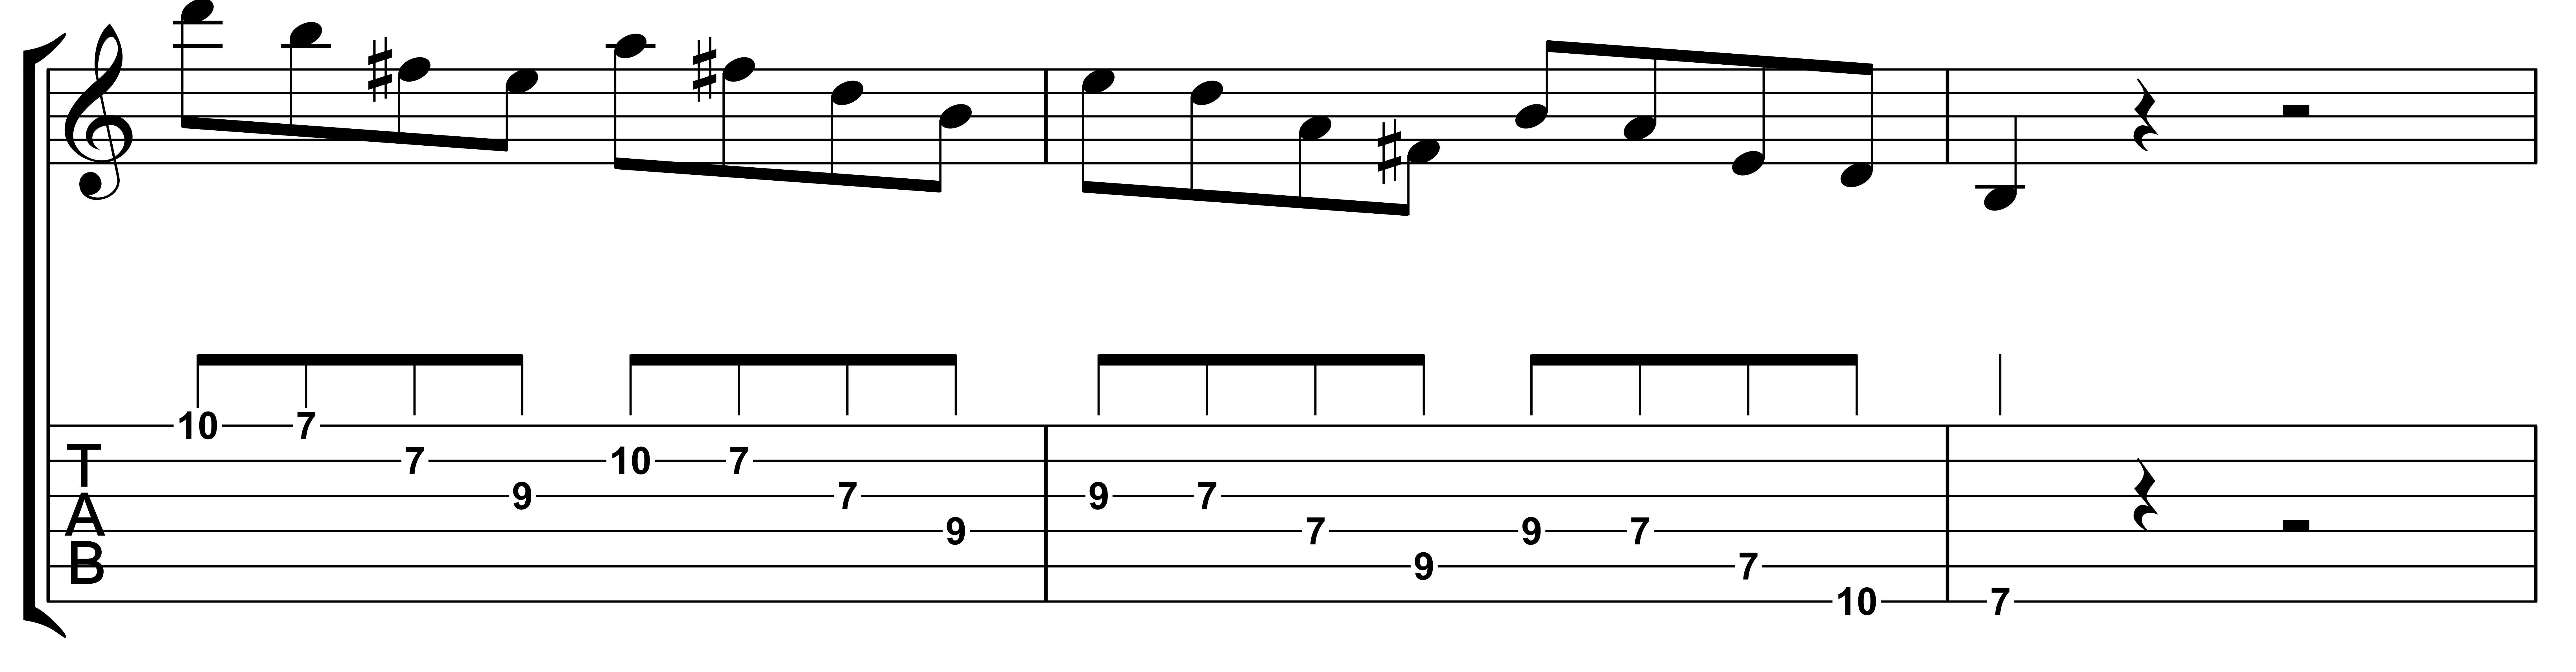 Pentatonic scale pattern in the key of b minor for guitar